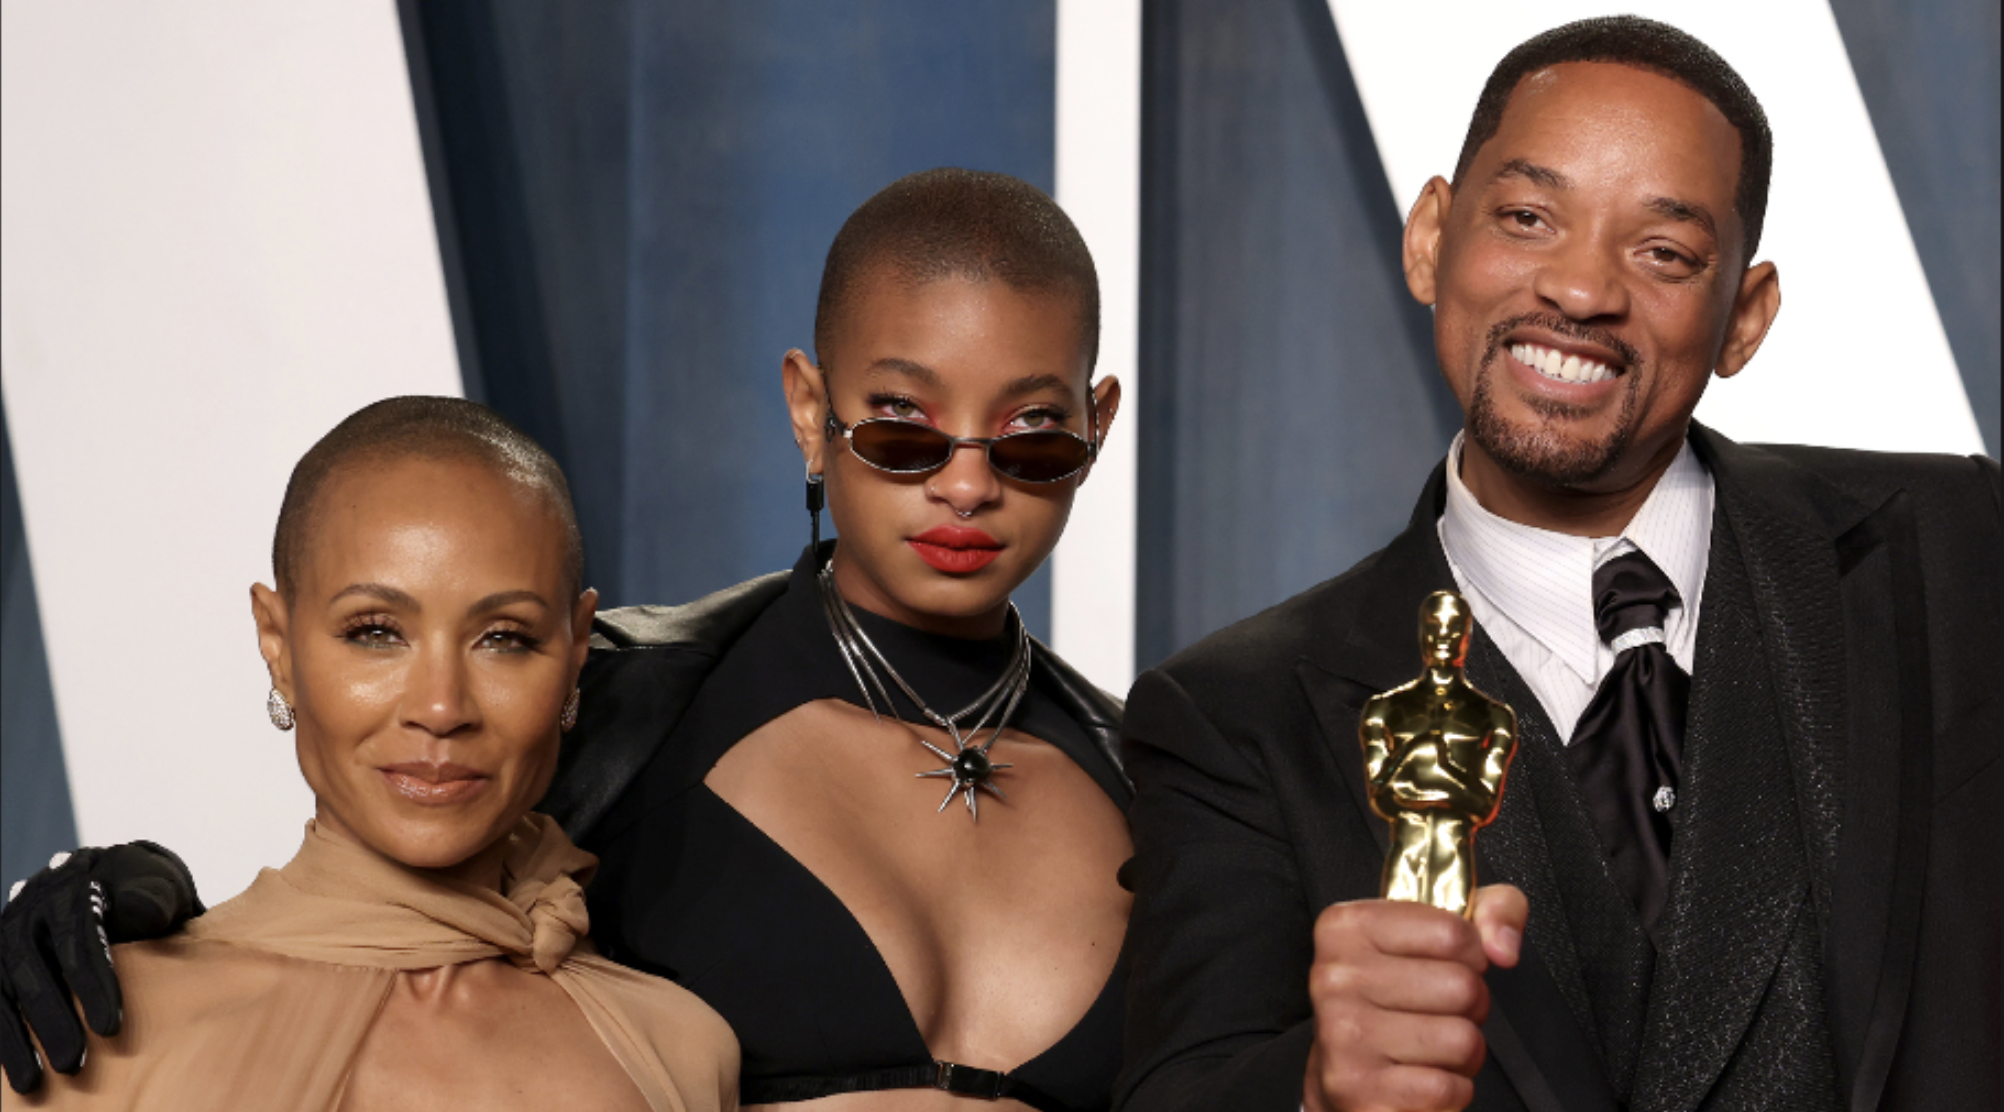 Jada Pinkett-Smith Explains Why She'd Want Willow To Have A Similar Relationship To Her And Will Smith